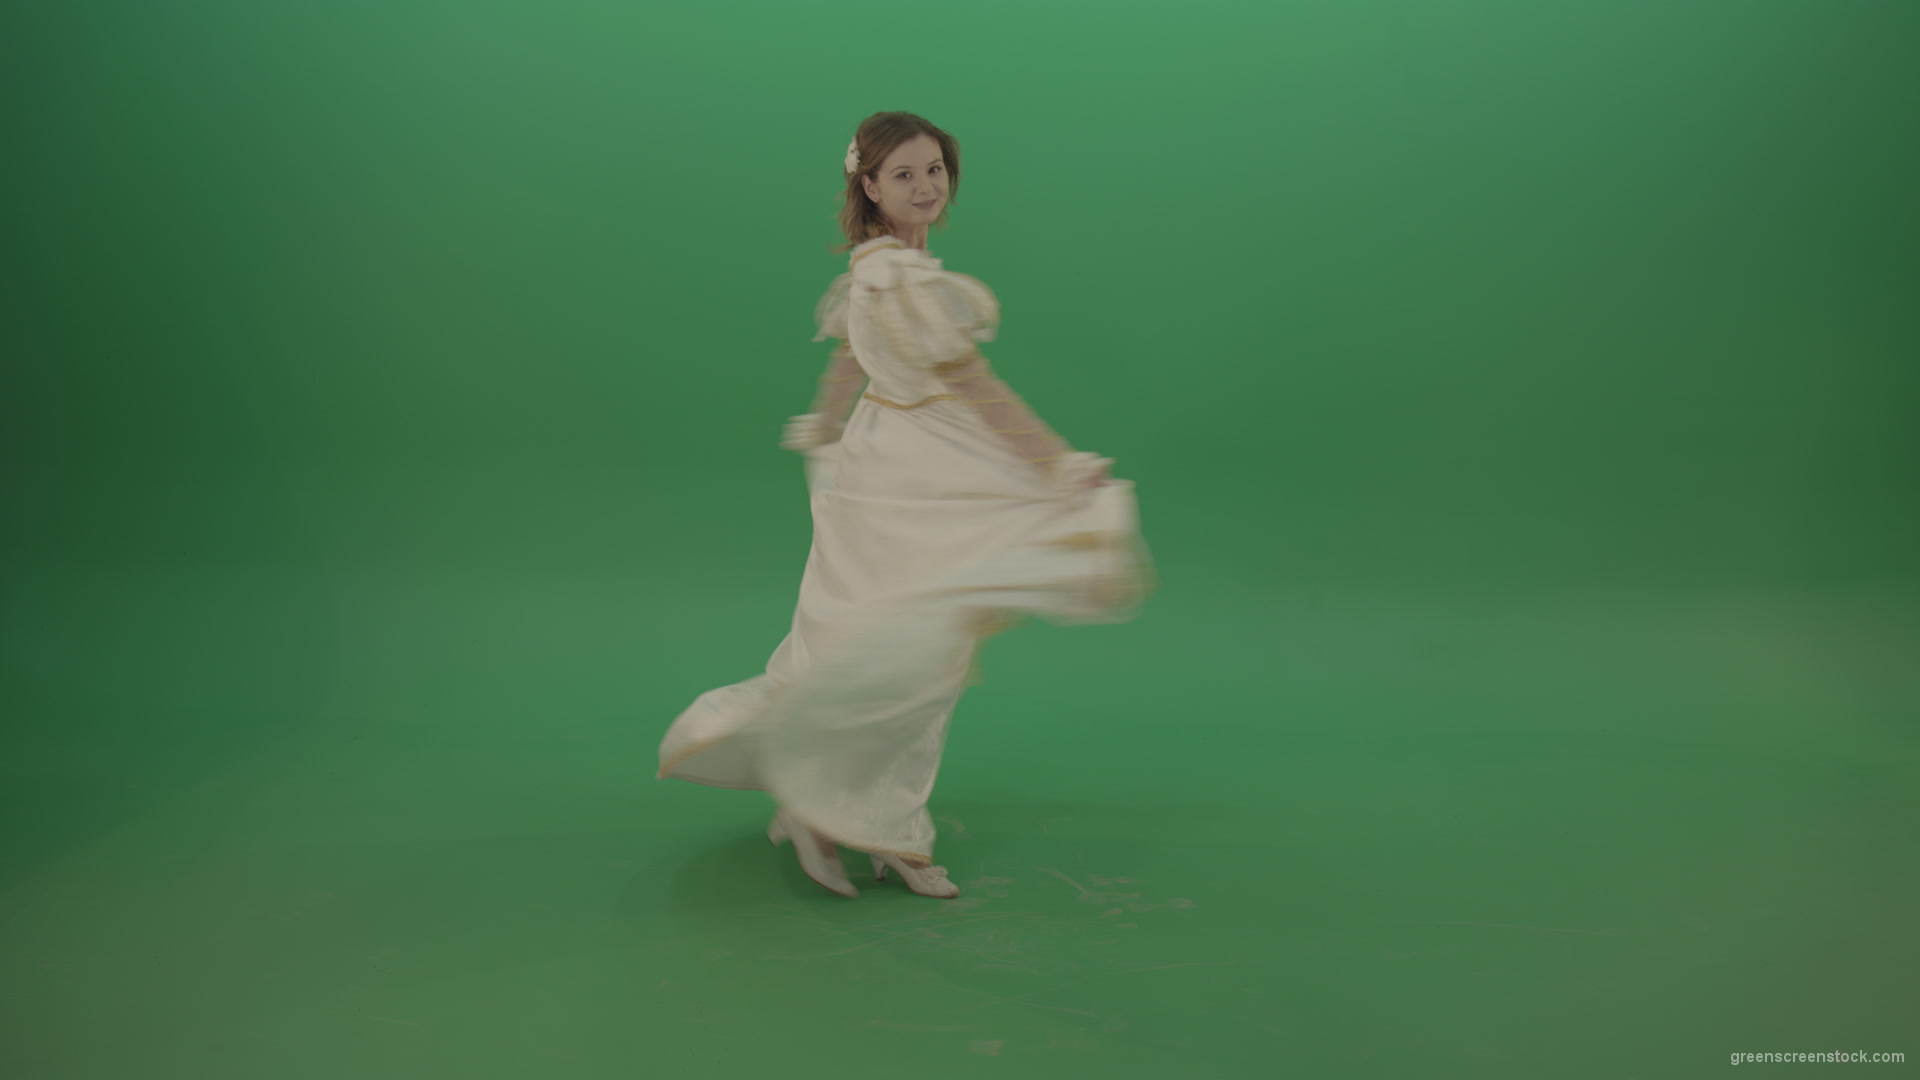 Princess-dances-twisting-around-the-circle-isolated-on-chromakey-background_007 Green Screen Stock